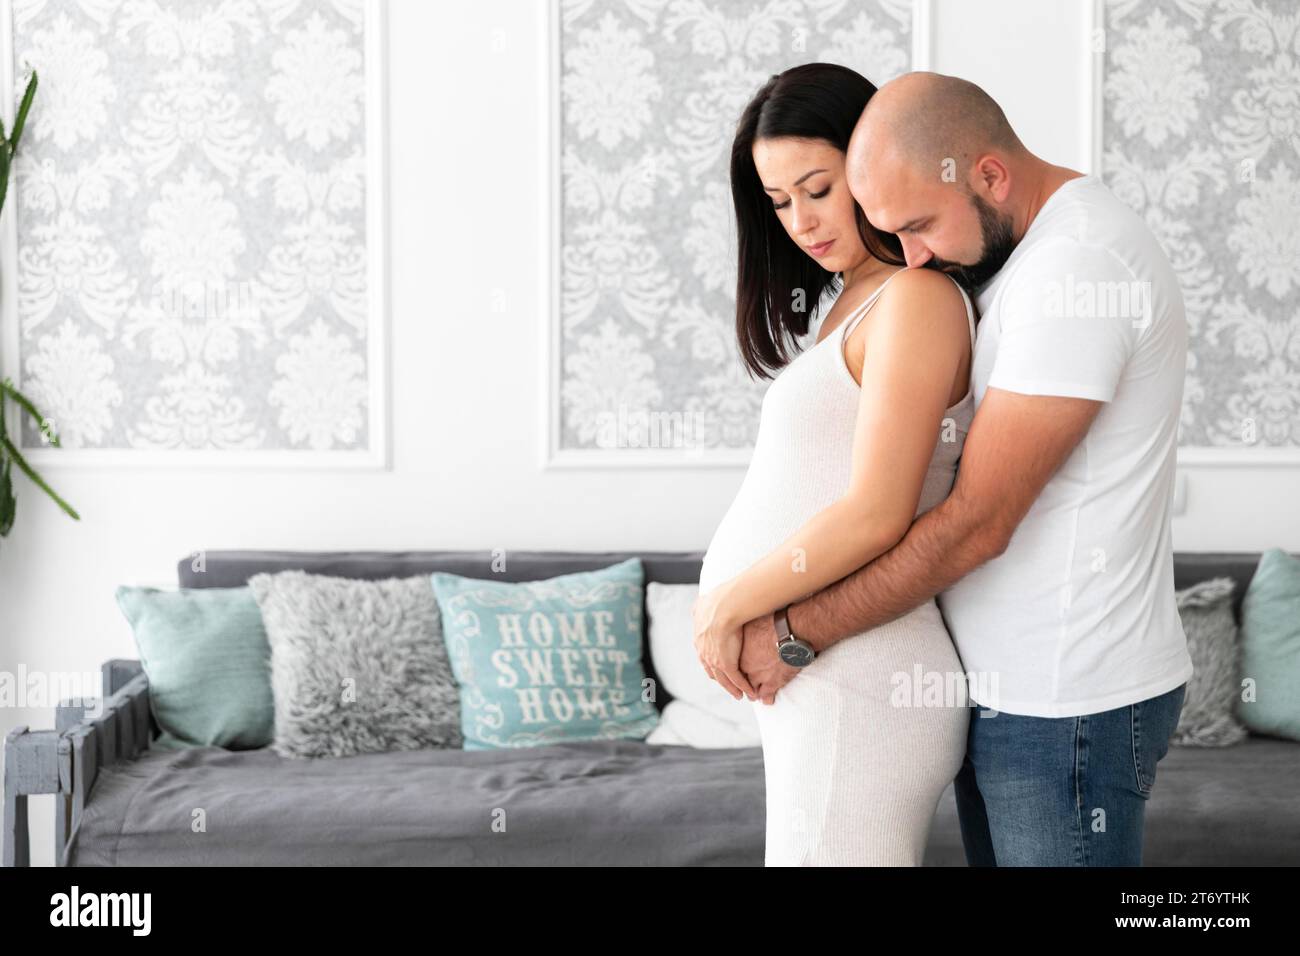 Medium shot pregnant woman spending time with her husband Stock Photo